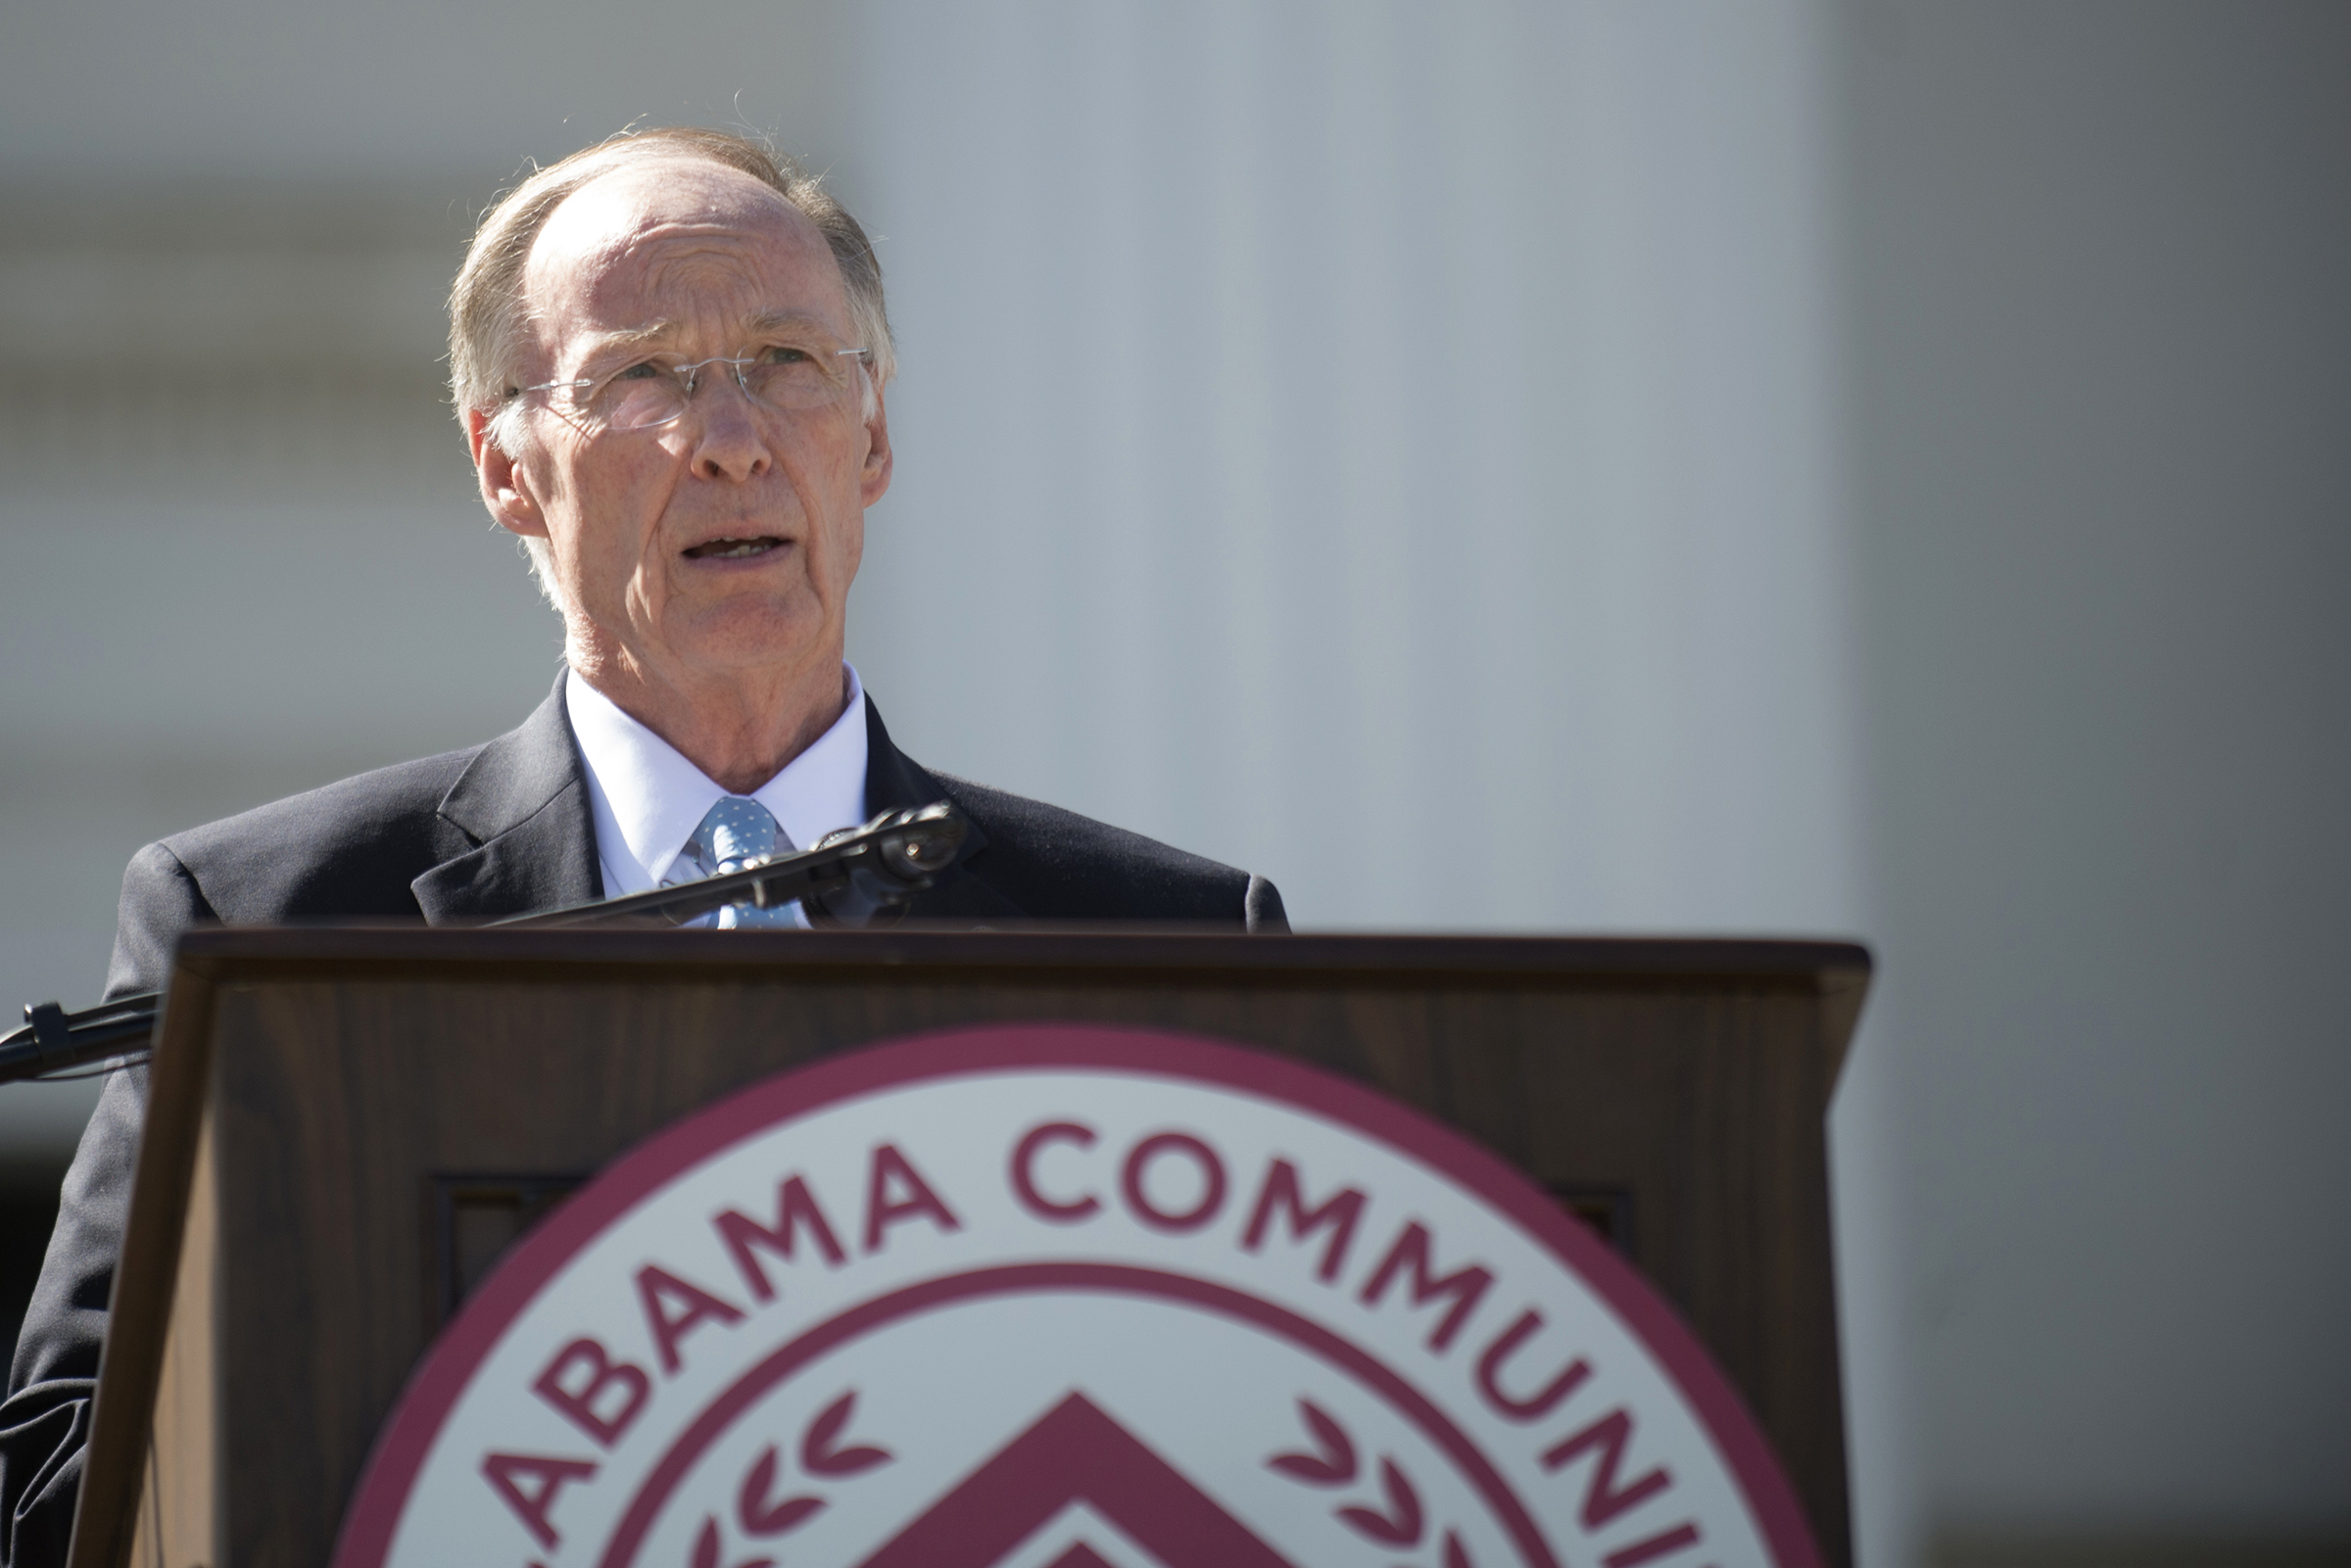 Gov. Robert Bentley speaks during Alabama Community College Day on the Alabama Capitol lawn on April 5, 2016, in Montgomery, Ala.